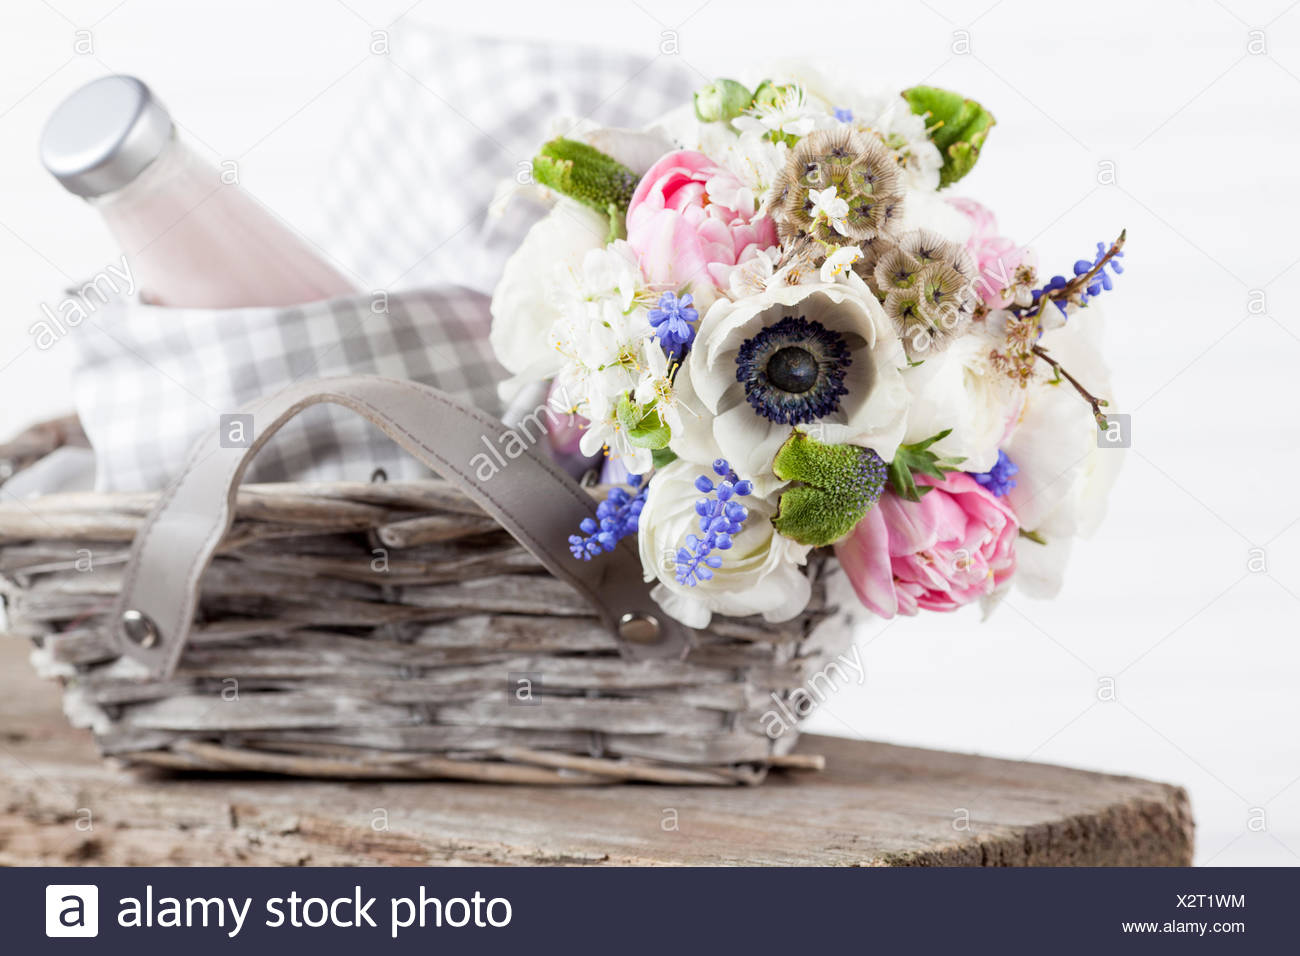 Rustic Picnic Basket With Flowers Stock Photo Alamy